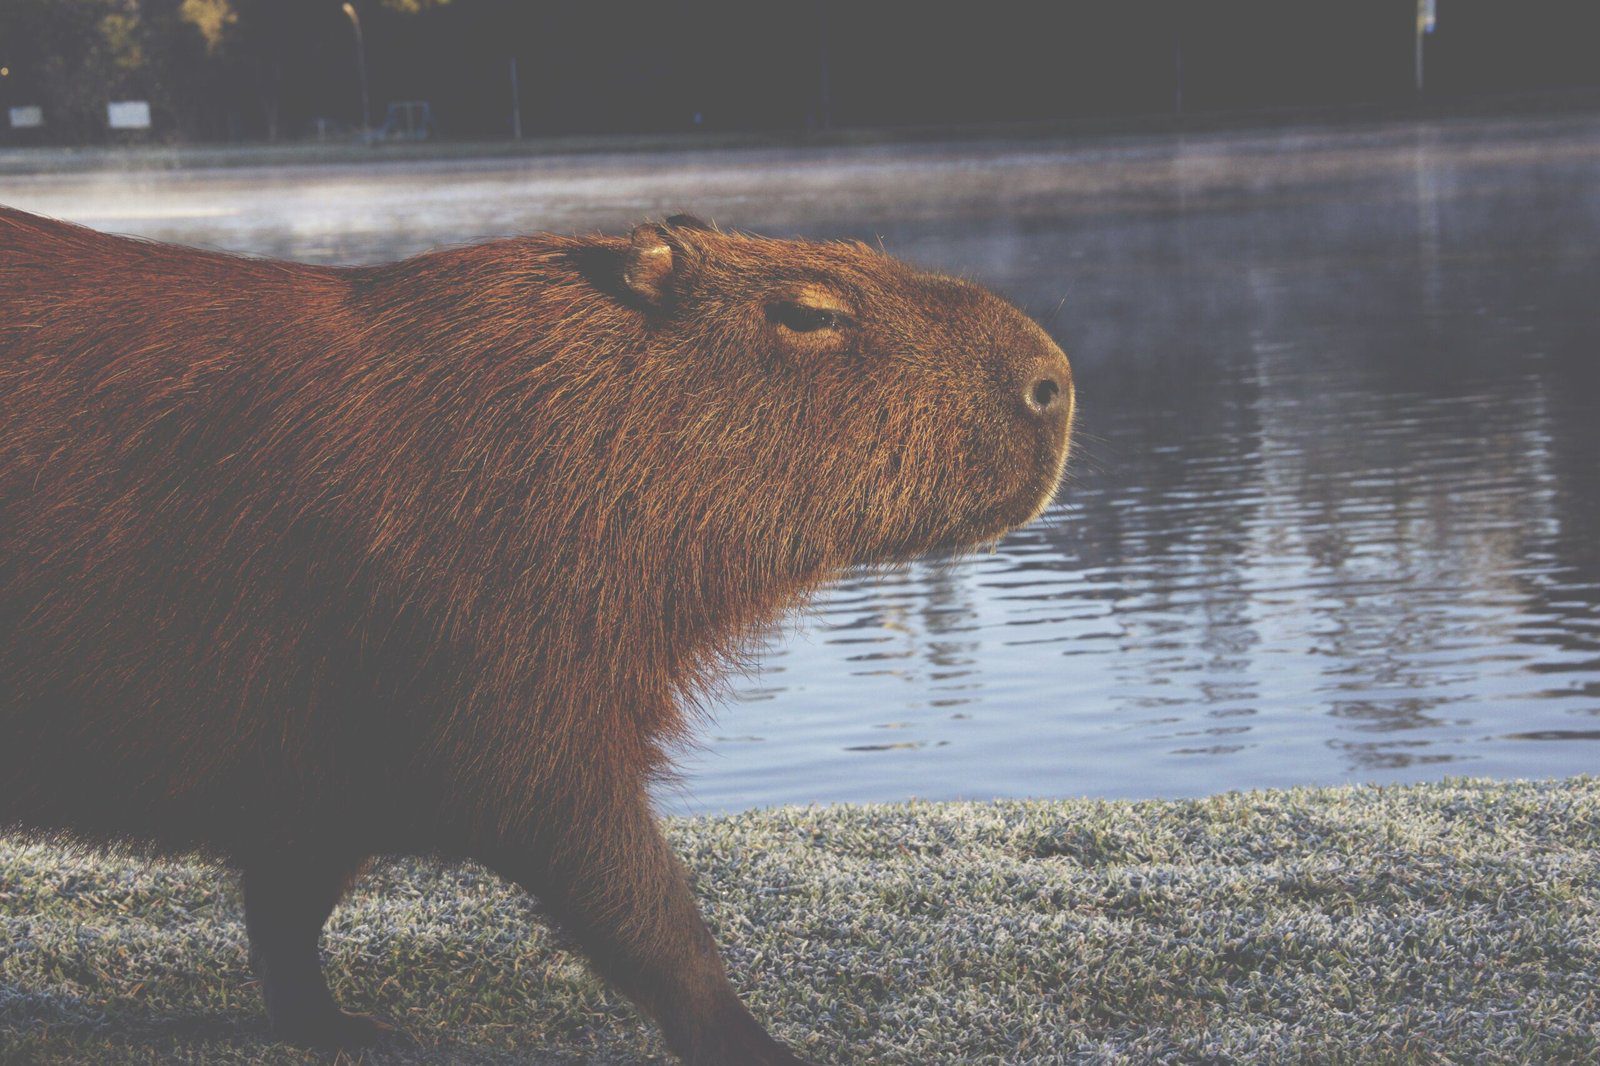 Adorable Picture of a Capybara Rodent